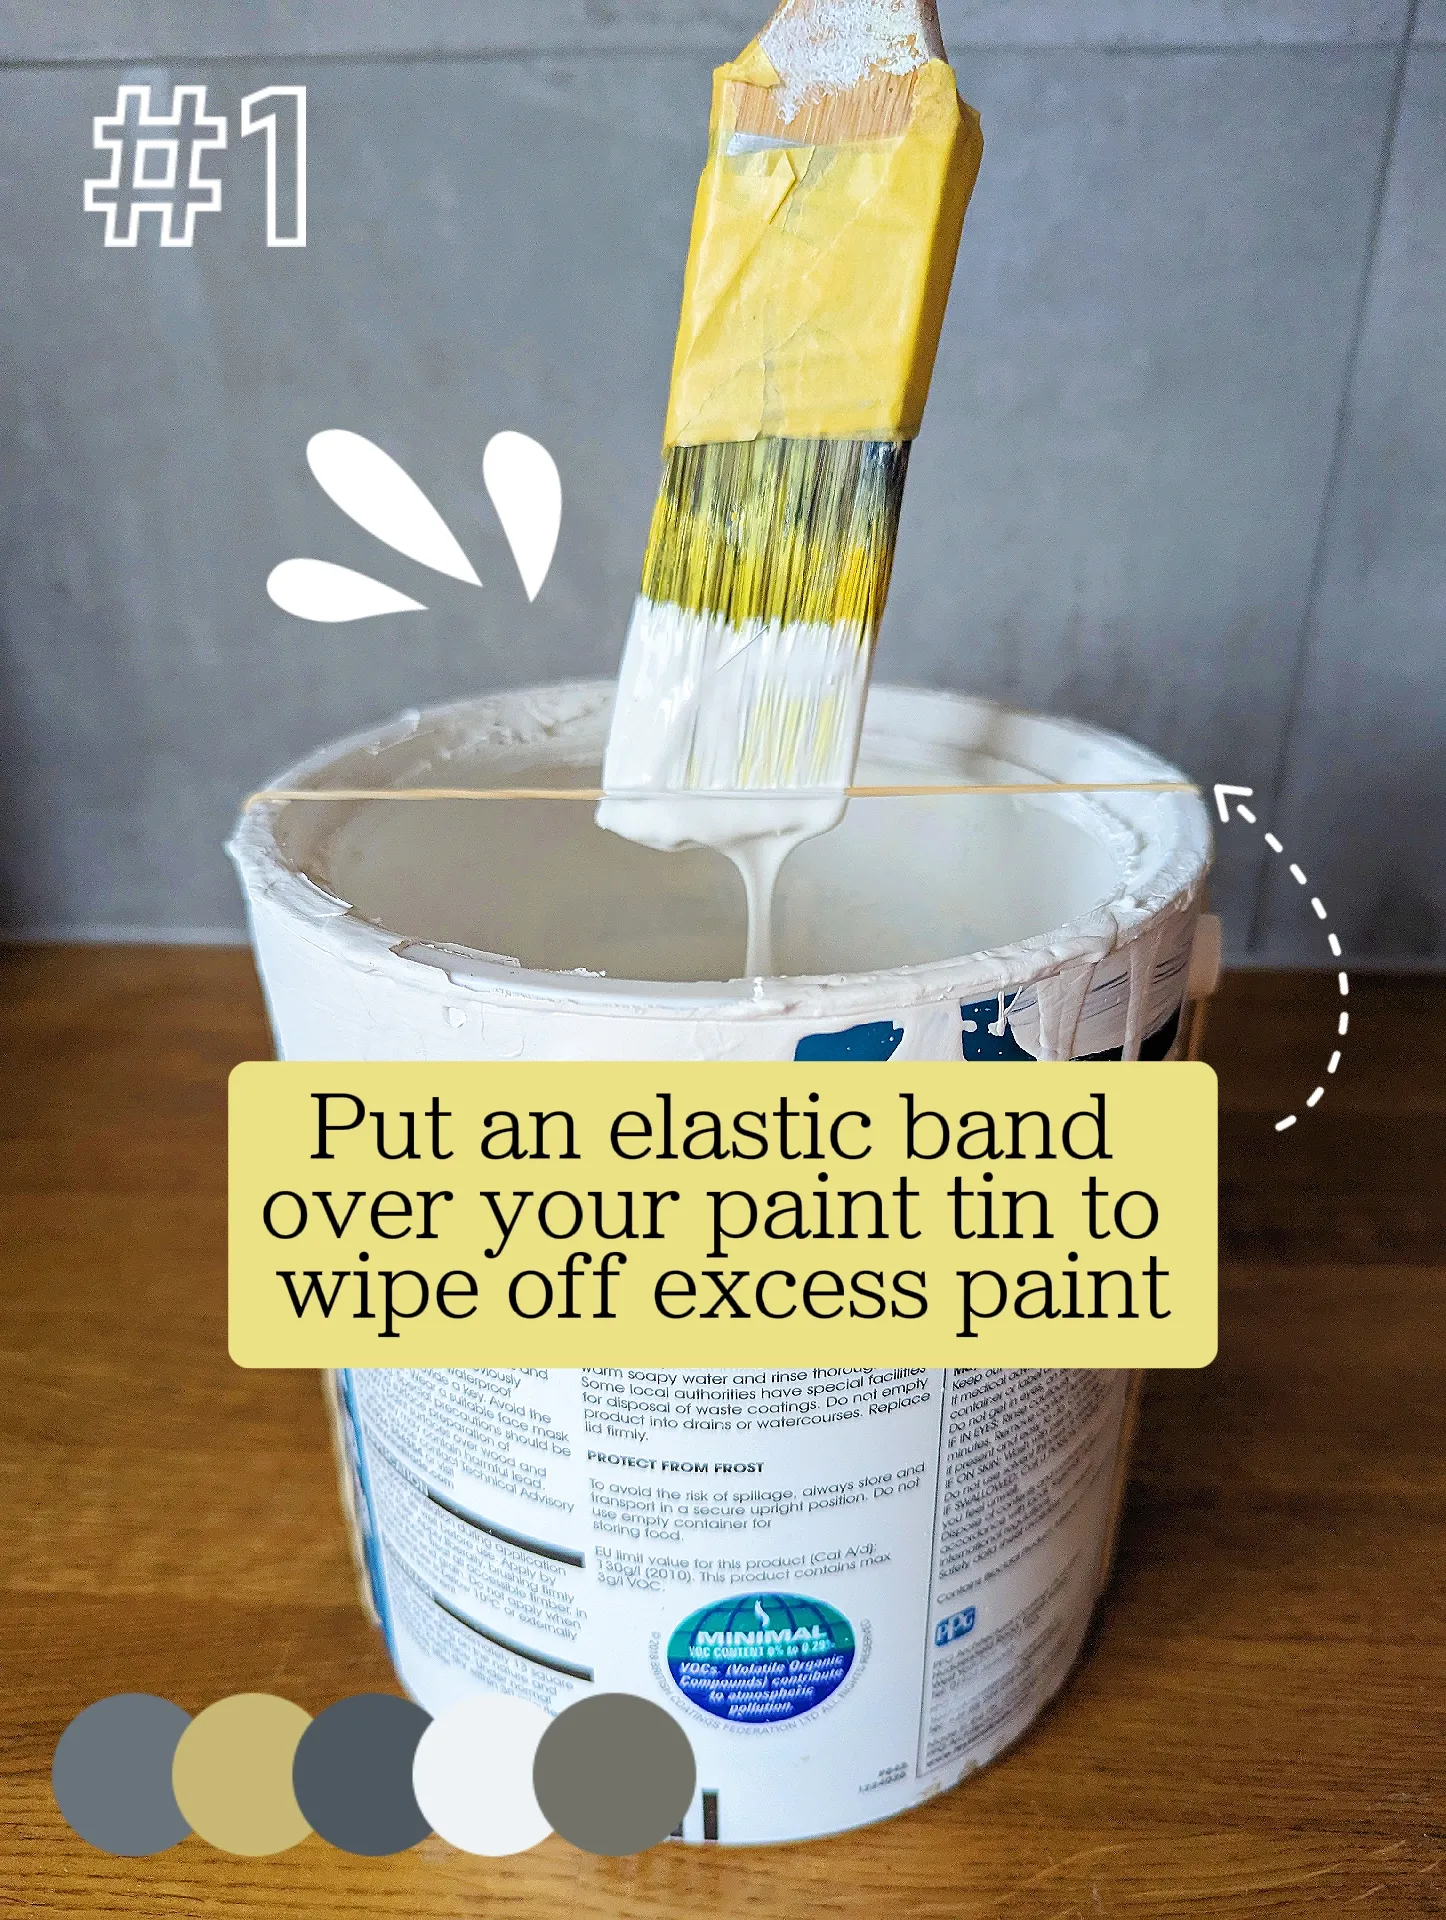 Have you ever seen this masking tool? #painting #diy 